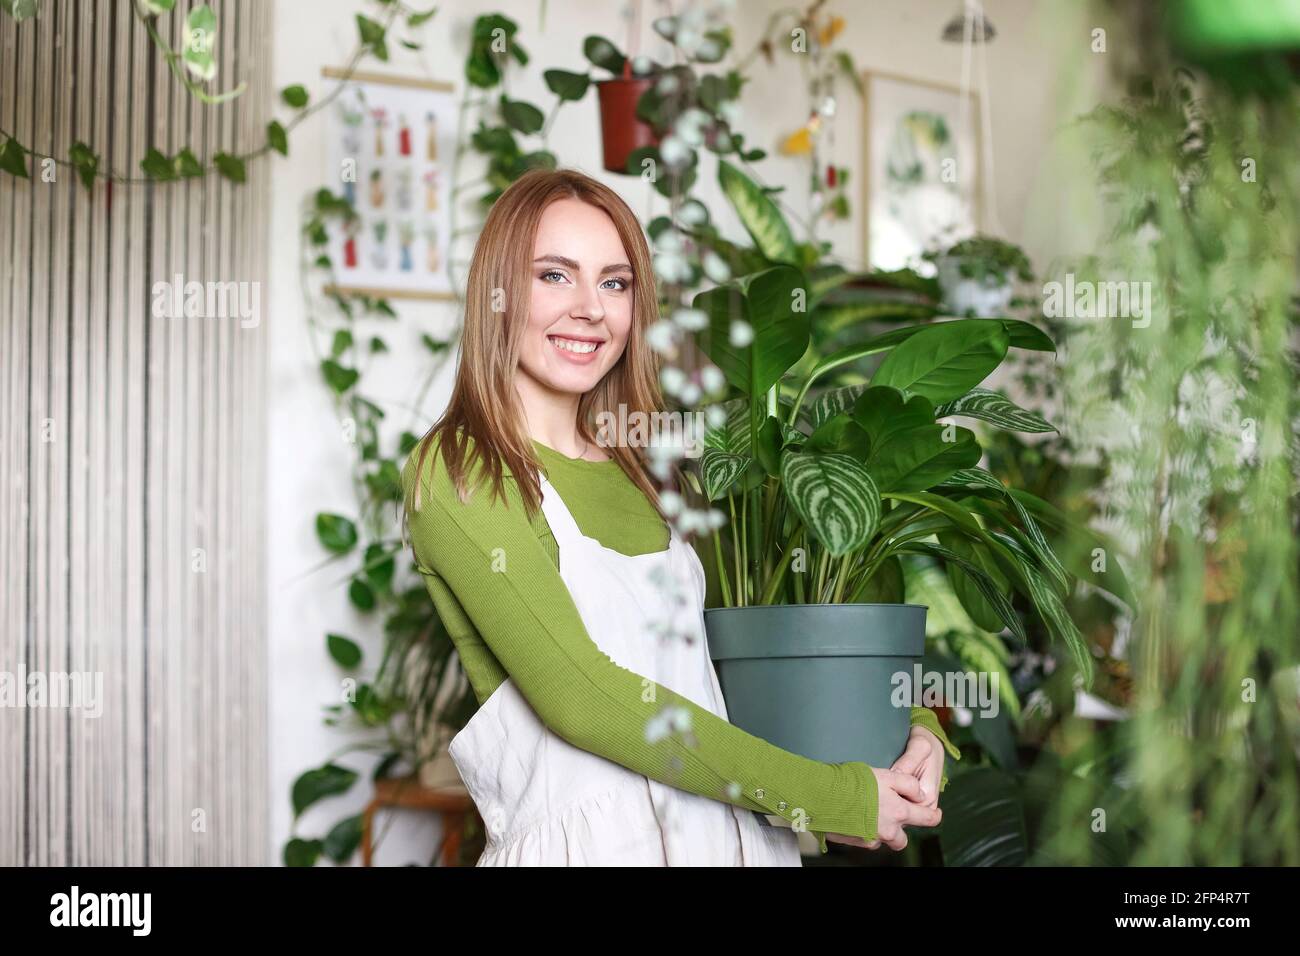 Content woman in white apron carrying pot with green plant while looking at camera working in shop Stock Photo